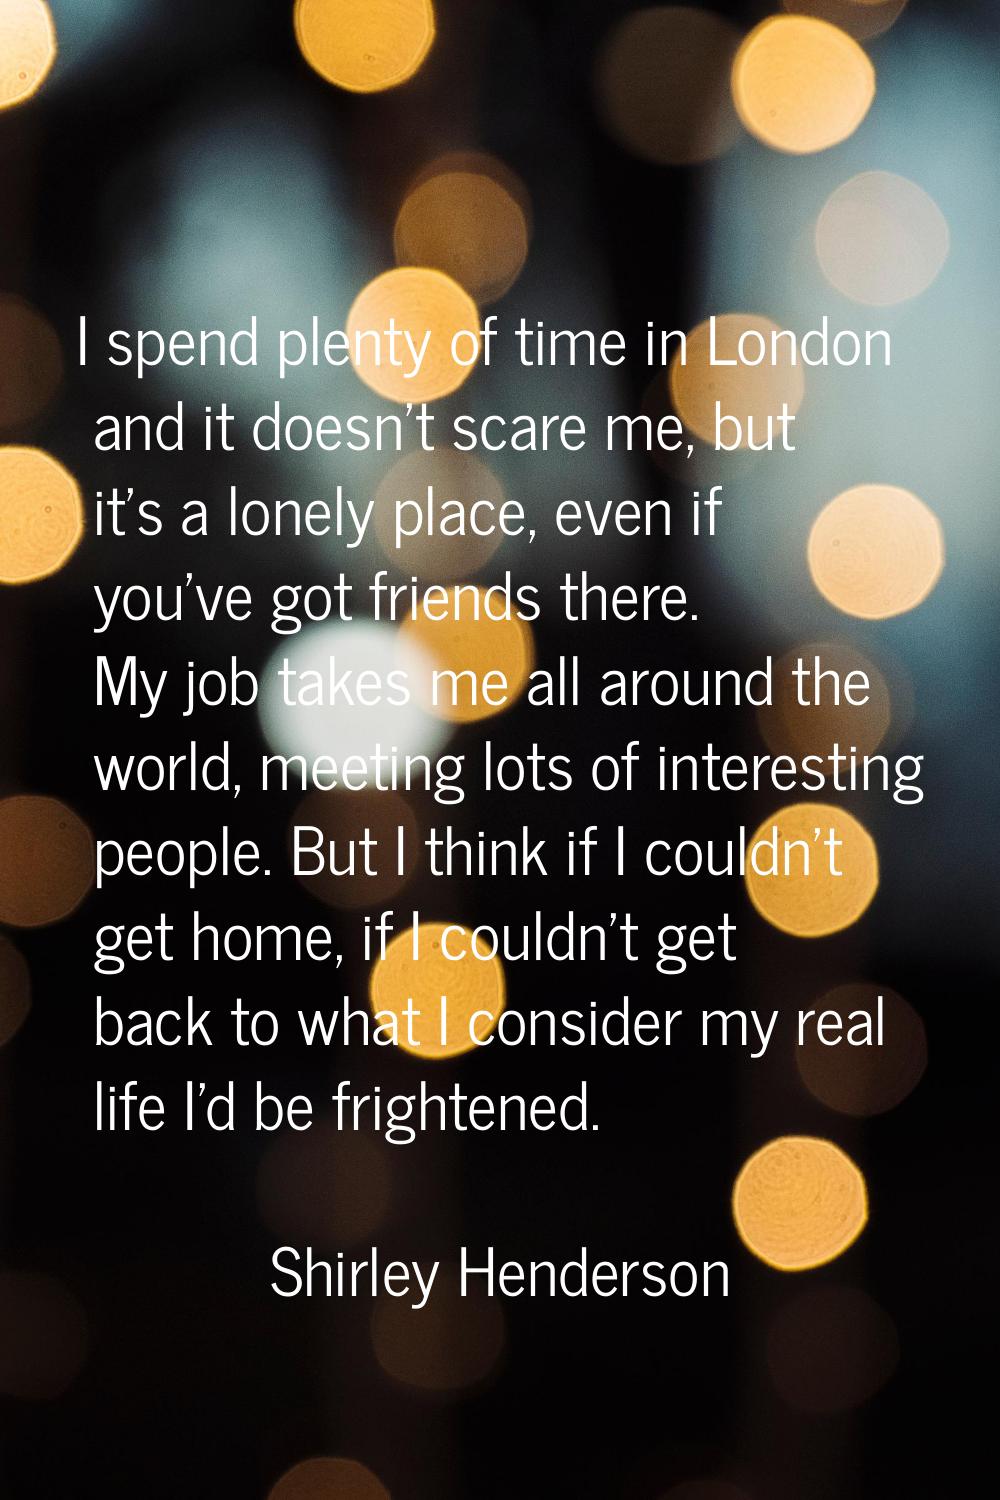 I spend plenty of time in London and it doesn't scare me, but it's a lonely place, even if you've g